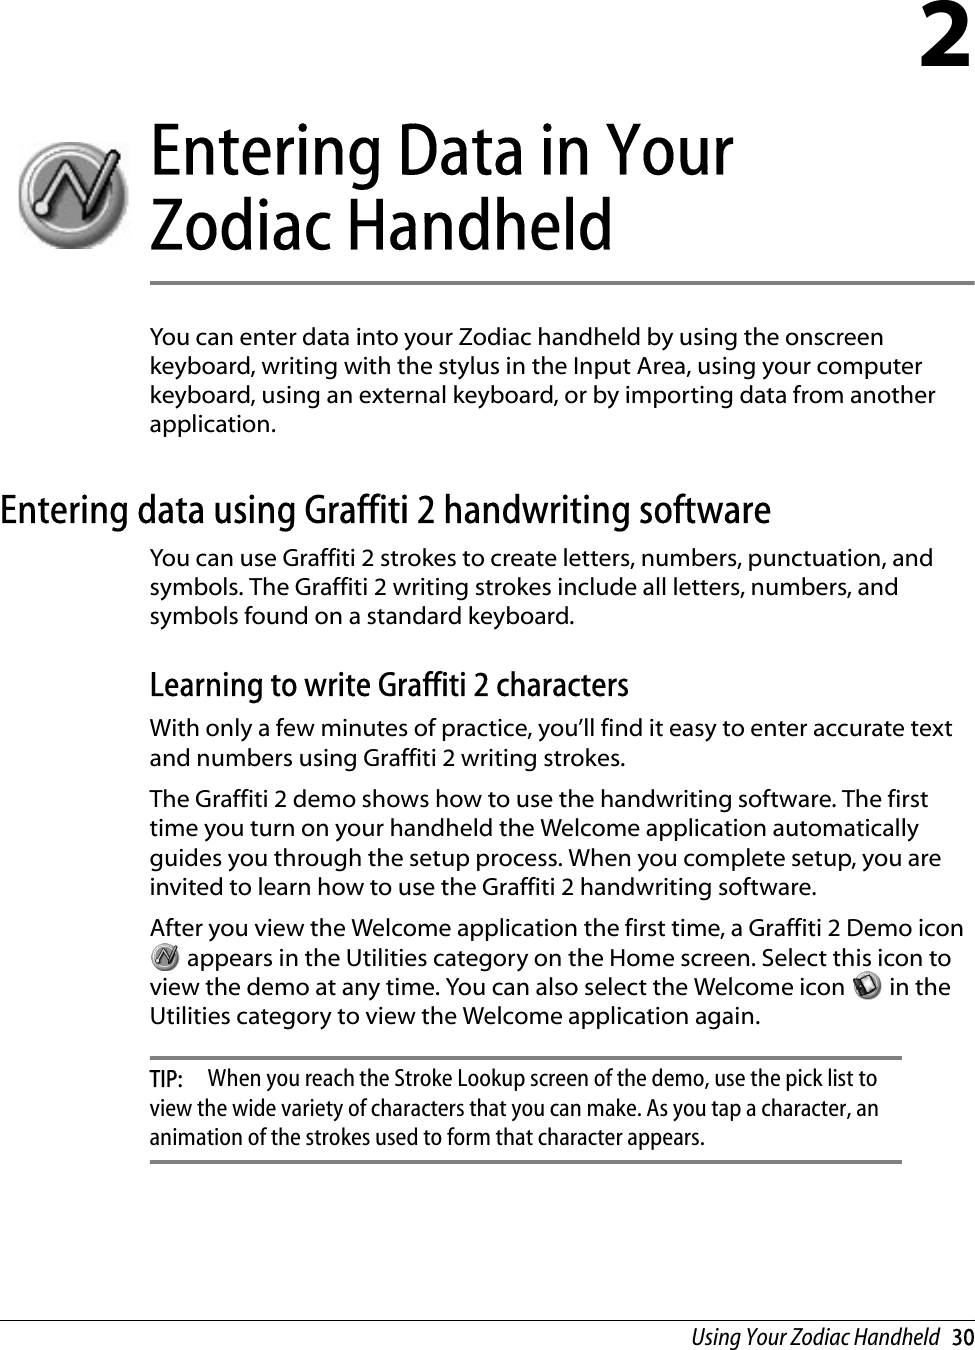 Using Your Zodiac Handheld   302Entering Data in Your  Zodiac HandheldYou can enter data into your Zodiac handheld by using the onscreen keyboard, writing with the stylus in the Input Area, using your computer keyboard, using an external keyboard, or by importing data from another application.Entering data using Graffiti 2 handwriting softwareYou can use Graffiti 2 strokes to create letters, numbers, punctuation, and symbols. The Graffiti 2 writing strokes include all letters, numbers, and symbols found on a standard keyboard. Learning to write Graffiti 2 charactersWith only a few minutes of practice, you’ll find it easy to enter accurate text and numbers using Graffiti 2 writing strokes.The Graffiti 2 demo shows how to use the handwriting software. The first time you turn on your handheld the Welcome application automatically guides you through the setup process. When you complete setup, you are invited to learn how to use the Graffiti 2 handwriting software.After you view the Welcome application the first time, a Graffiti 2 Demo icon  appears in the Utilities category on the Home screen. Select this icon to view the demo at any time. You can also select the Welcome icon   in the Utilities category to view the Welcome application again. TIP:  When you reach the Stroke Lookup screen of the demo, use the pick list to view the wide variety of characters that you can make. As you tap a character, an animation of the strokes used to form that character appears. 